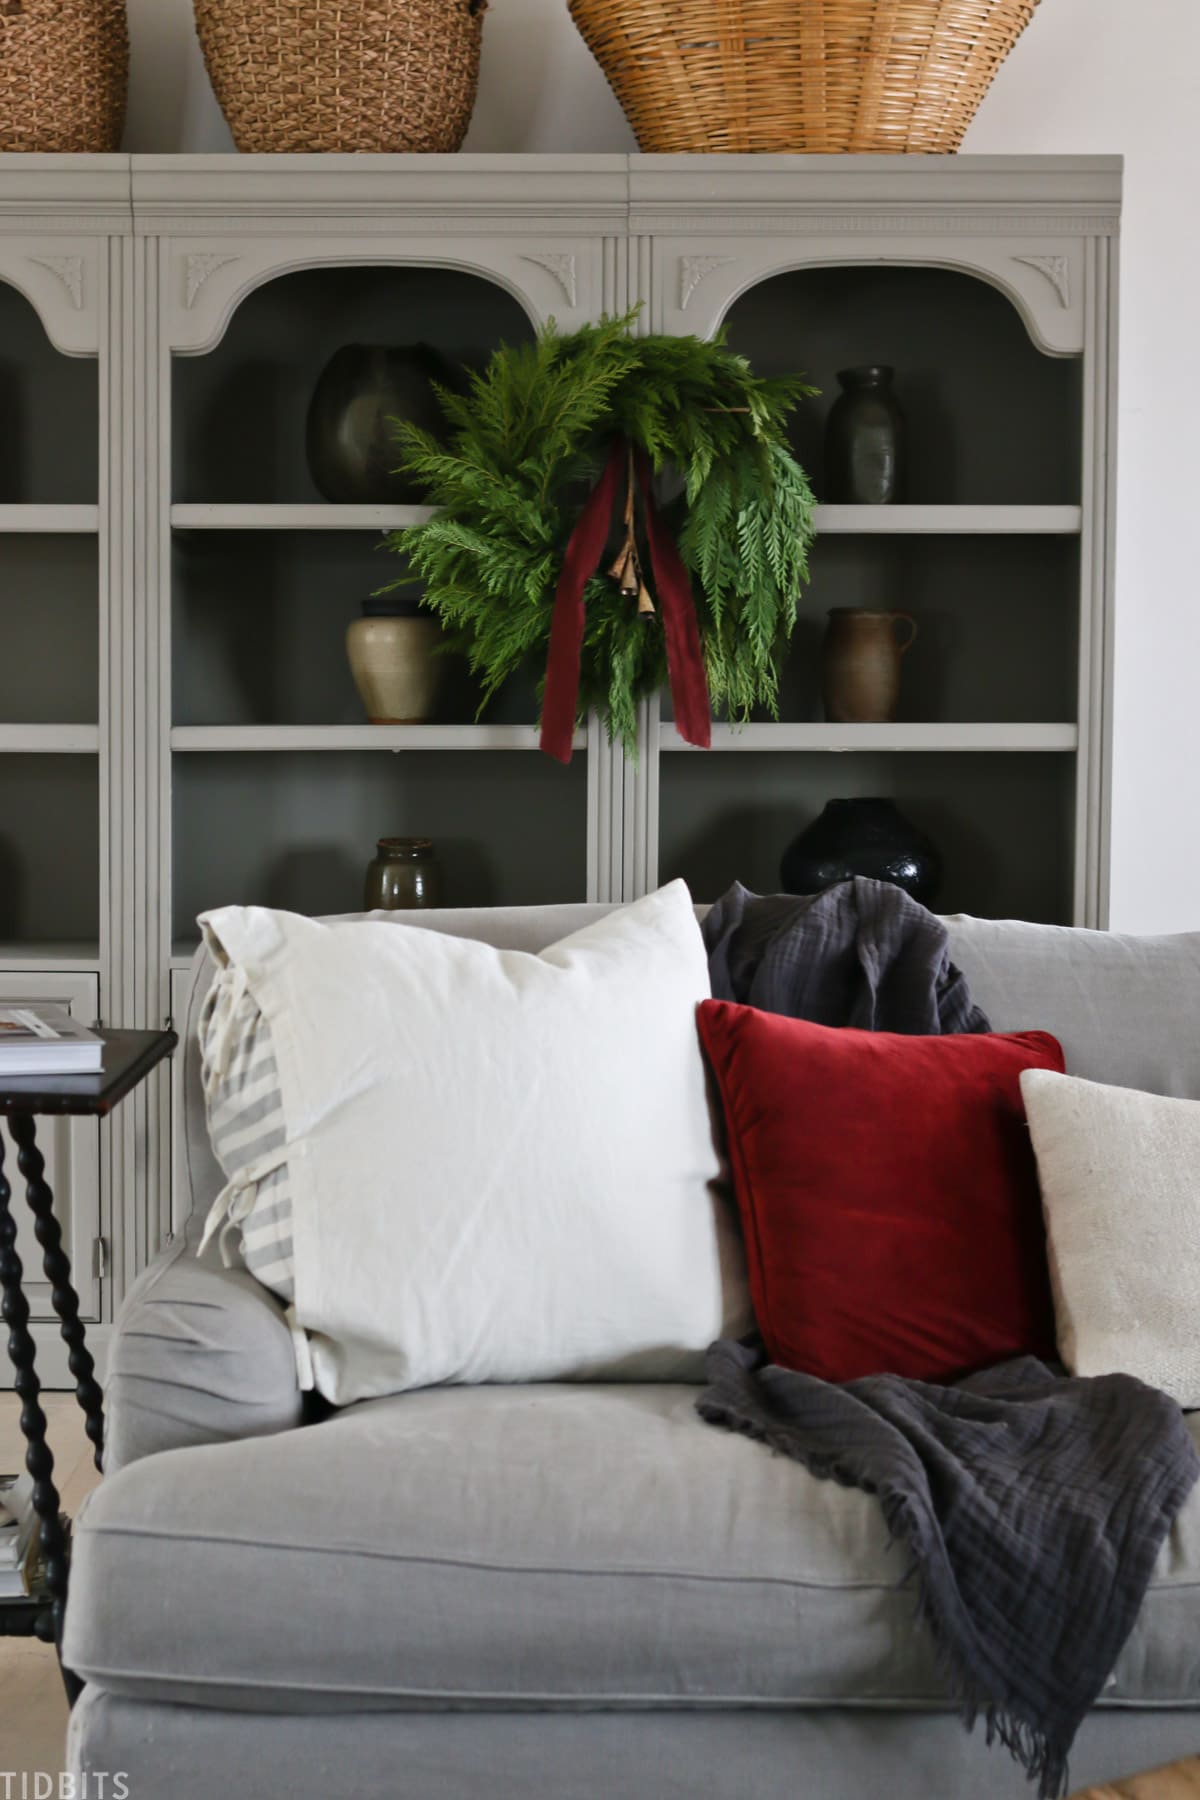 gray couch with decorative pillows with a Christmas wreath and red ribbon hanging above it